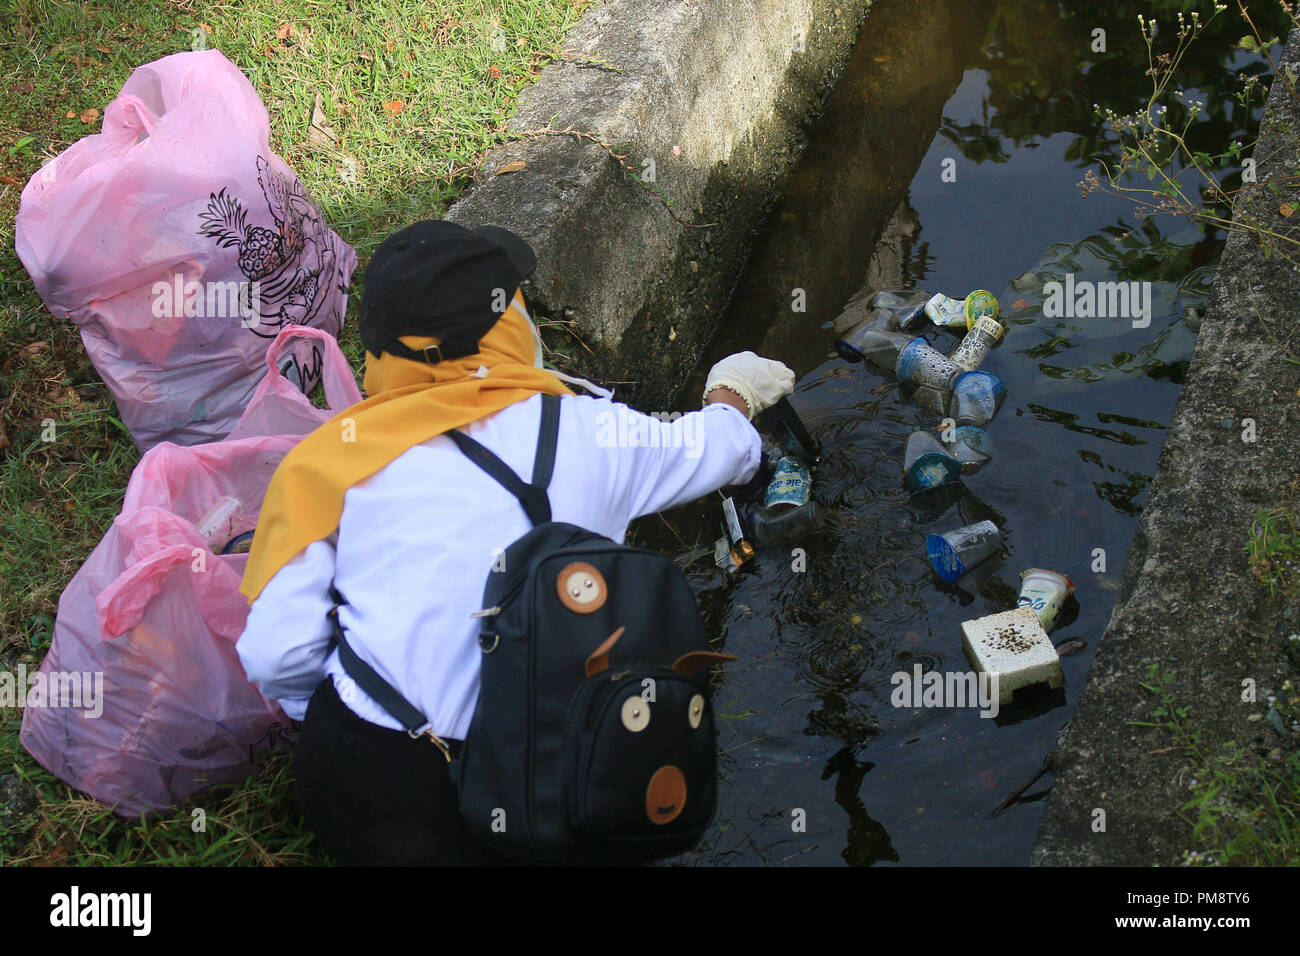 Female volunteers seen cleaning up the waste from the drainage. World Cleanup Day is a global social action program that aims to combat global waste problems. Today there are 157 countries, 380 million volunteers around the world taking part of cleaning up trashes from road sides and drainage. Stock Photo